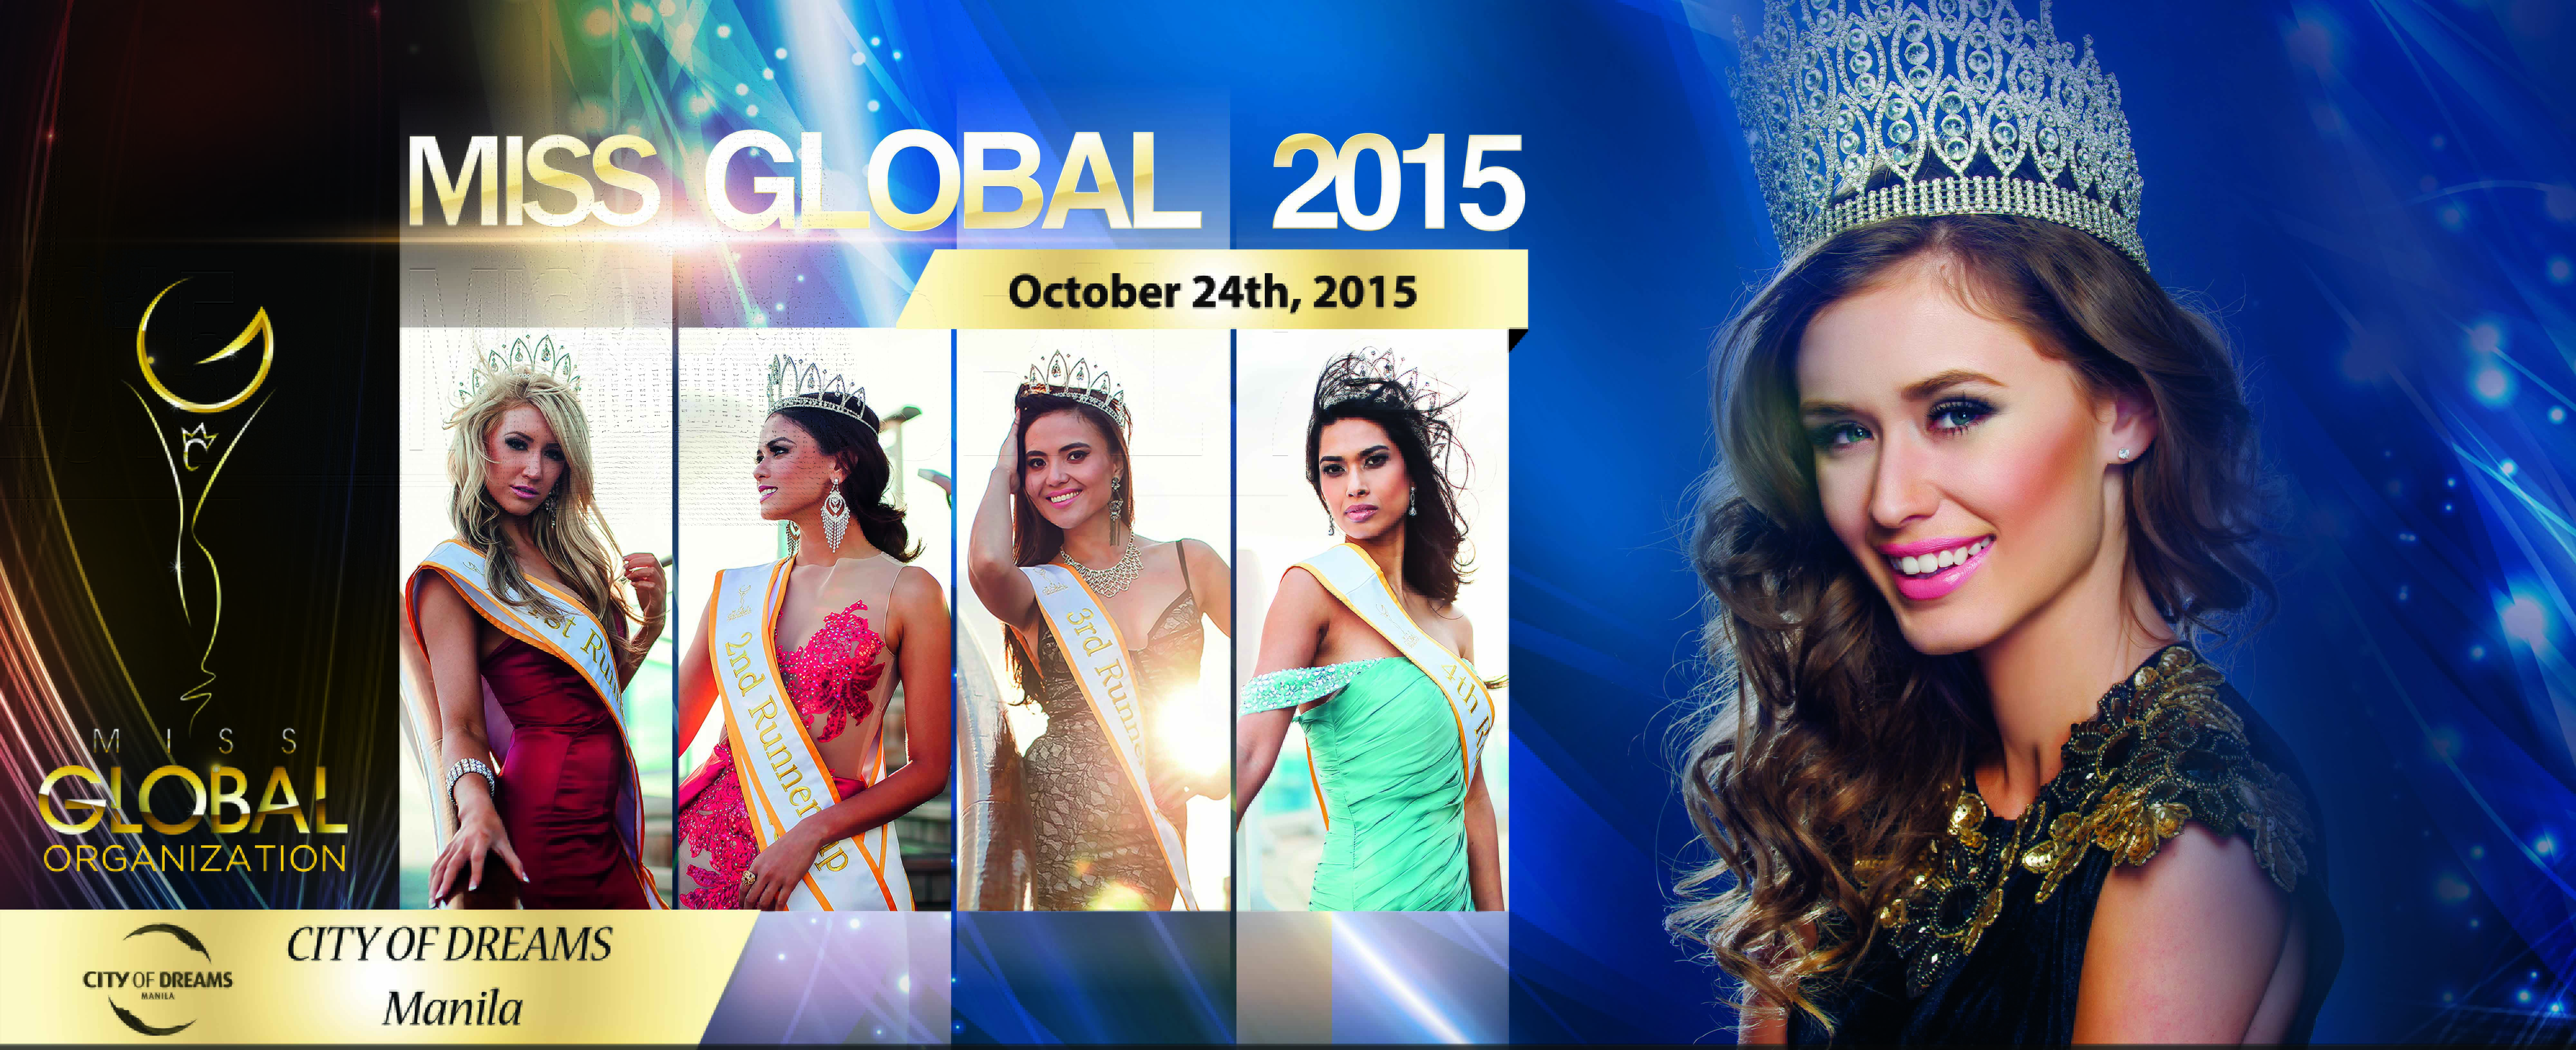 Miss Global 2015 hosted in the Philippines at the City of Dreams Manila Resort and Casino